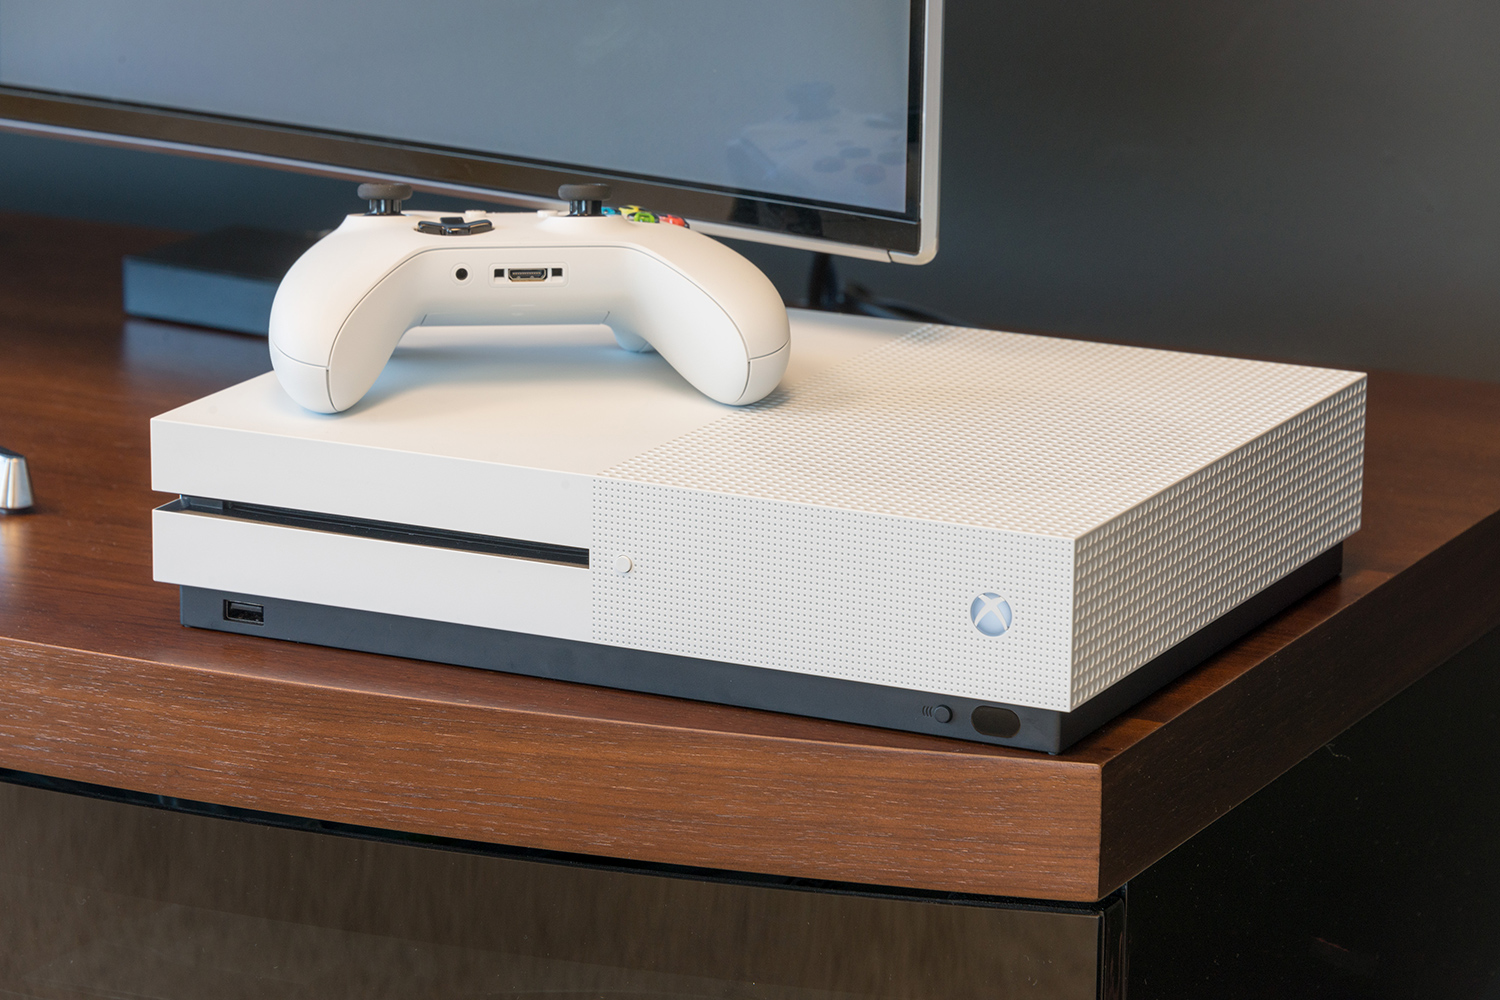 Xbox One Xbox S: Is a Mid-Tier Upgrade Worth Your Money? | Digital Trends